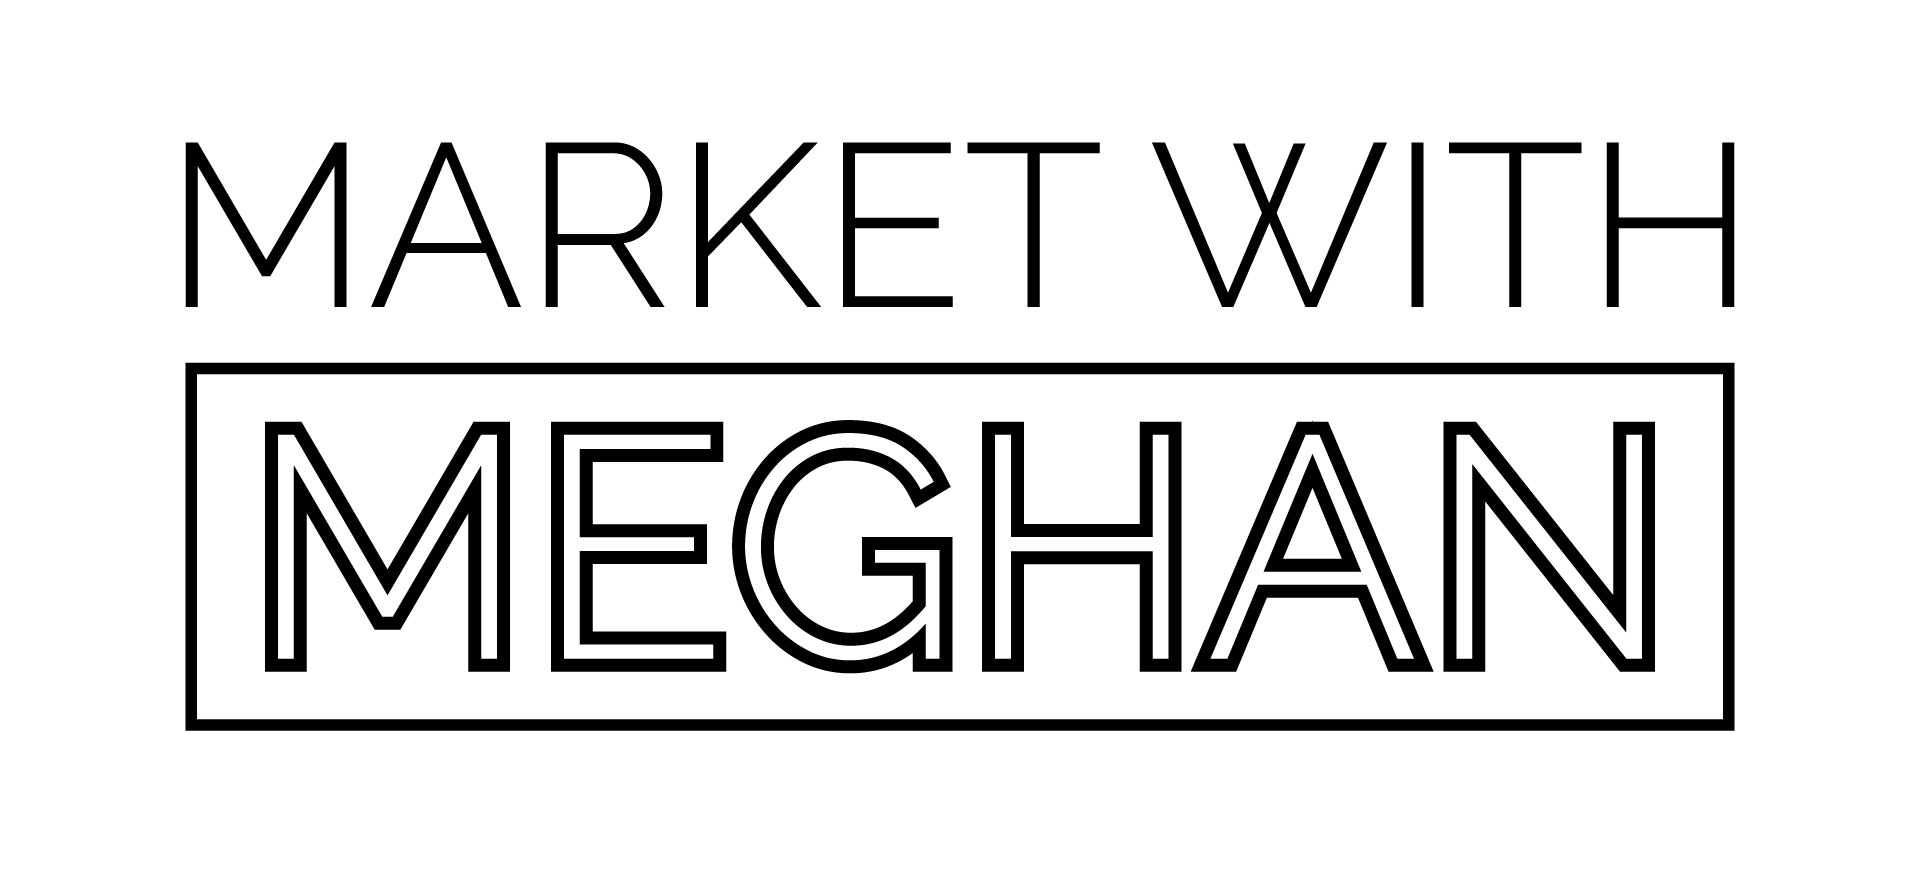 Market With Meghan: Sign in